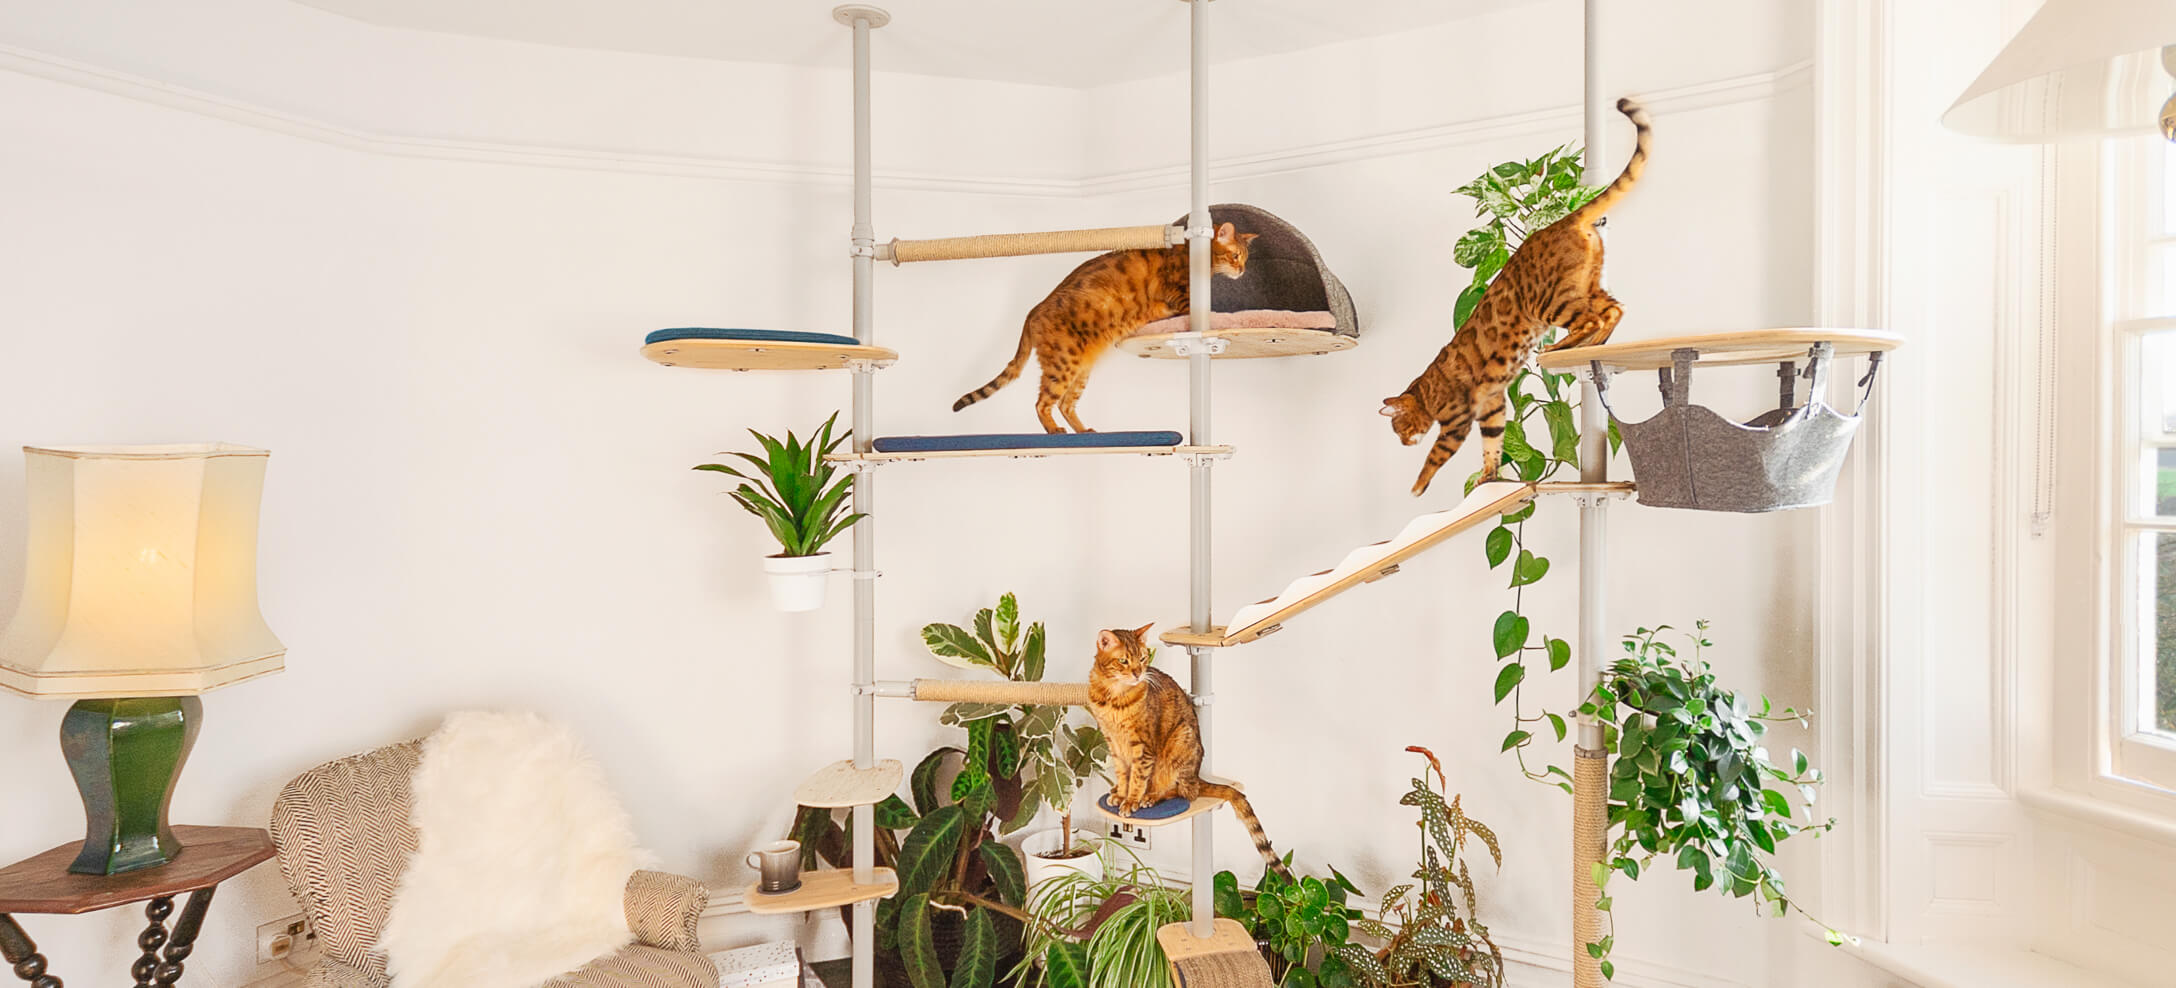 cats playing on an indoor cat tree with lots of accessories